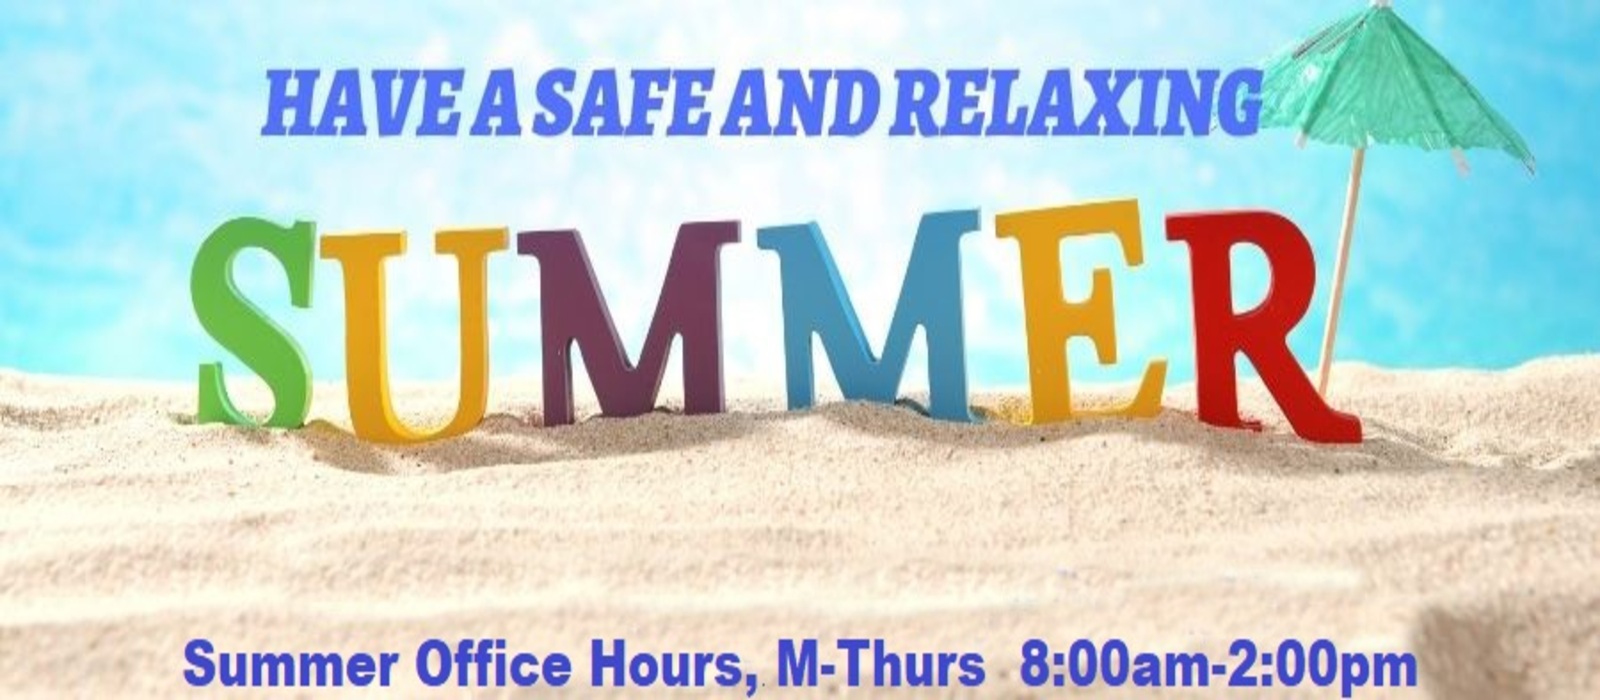 summerr hours 8am-2pm